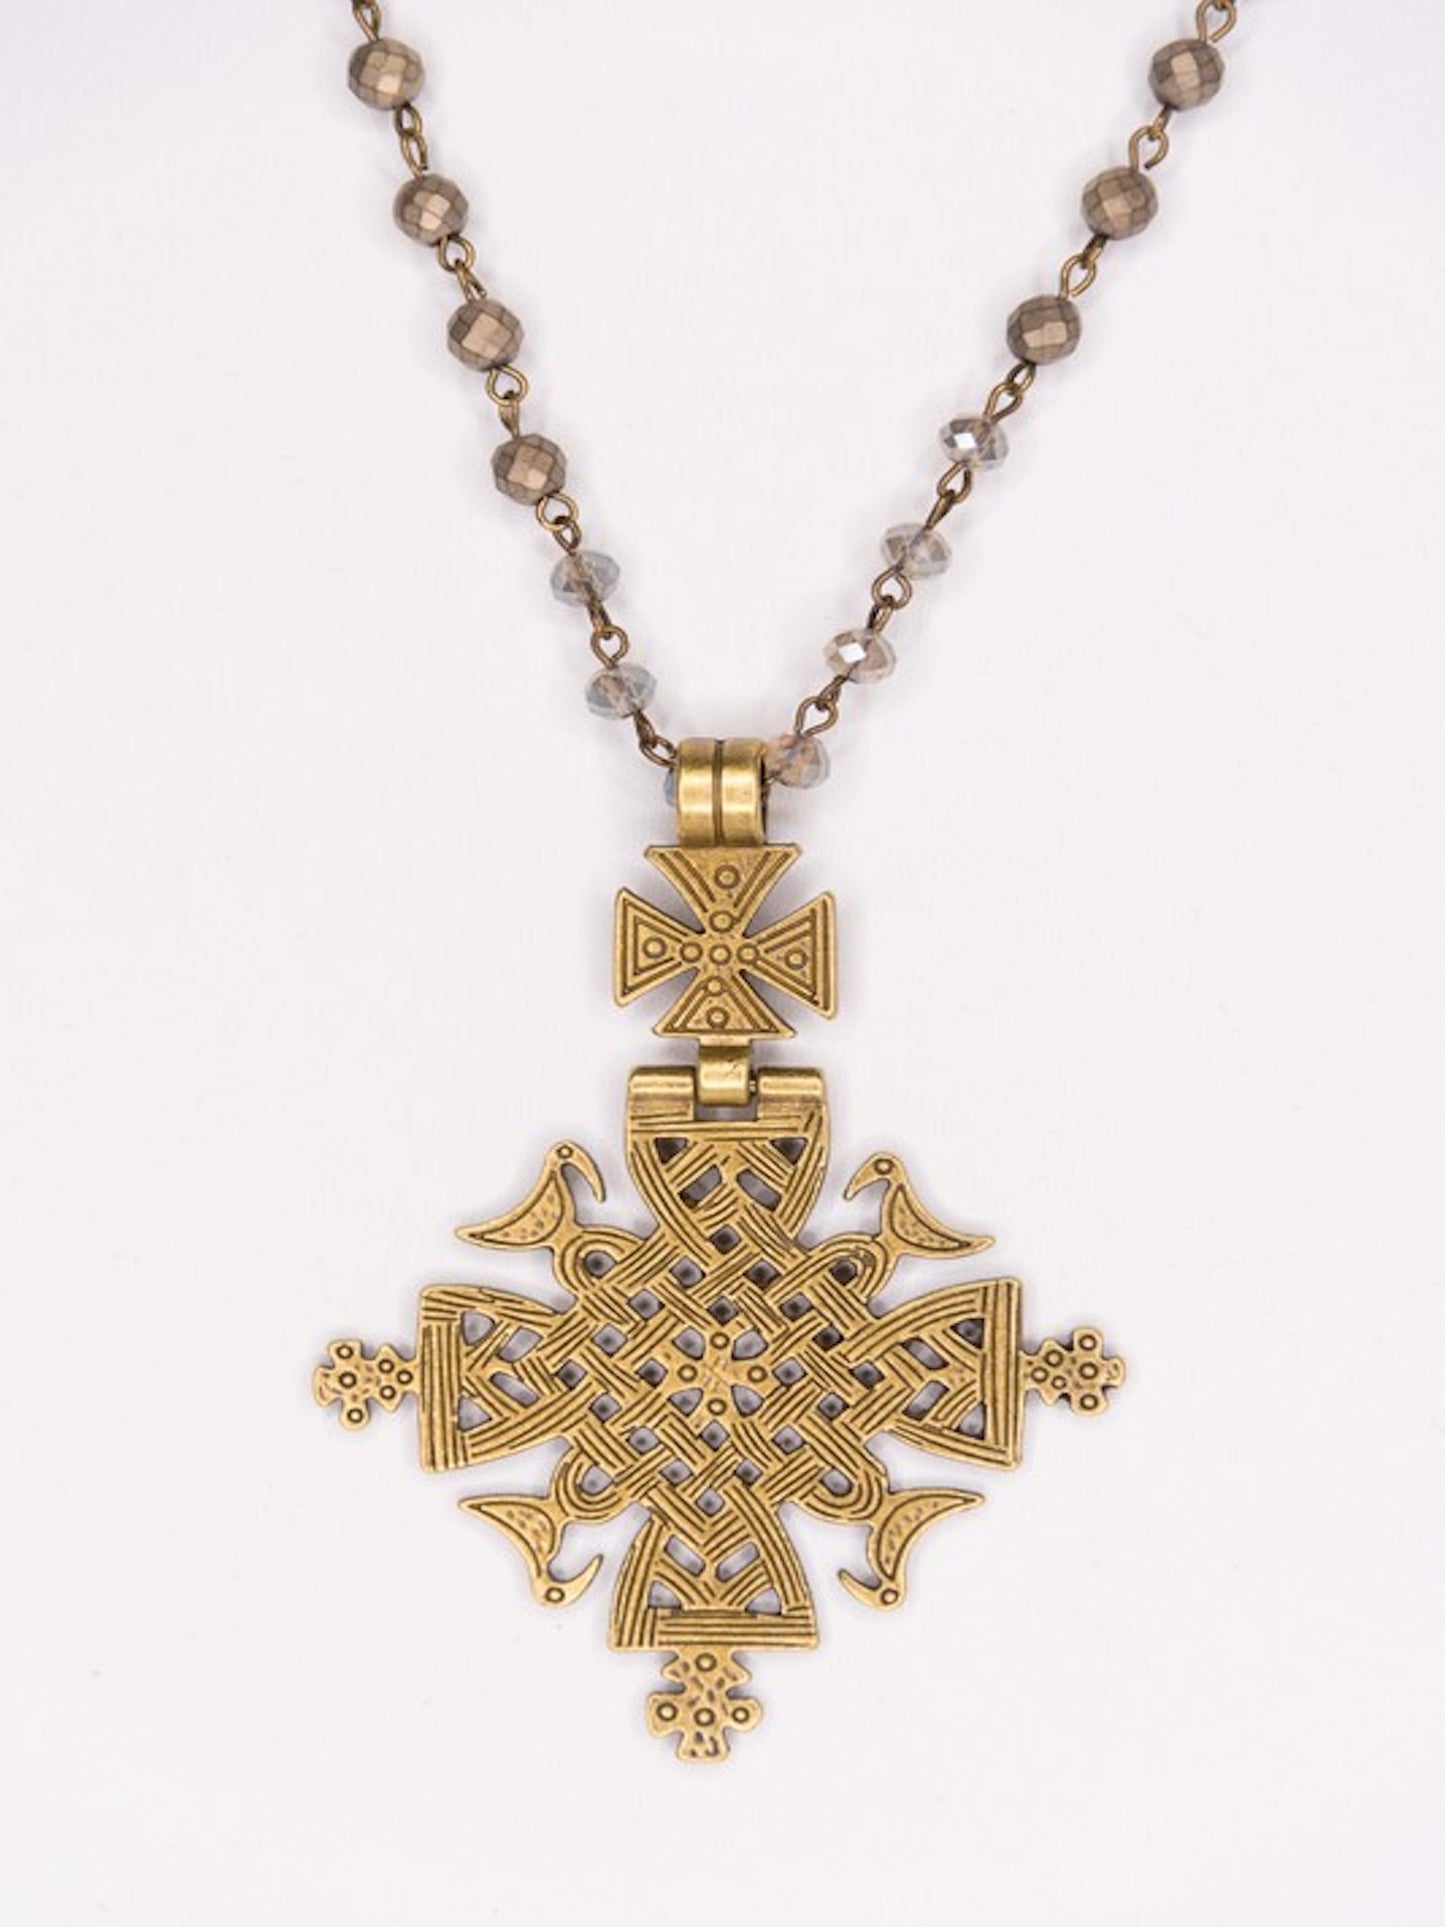 The Delaney Cross Necklace